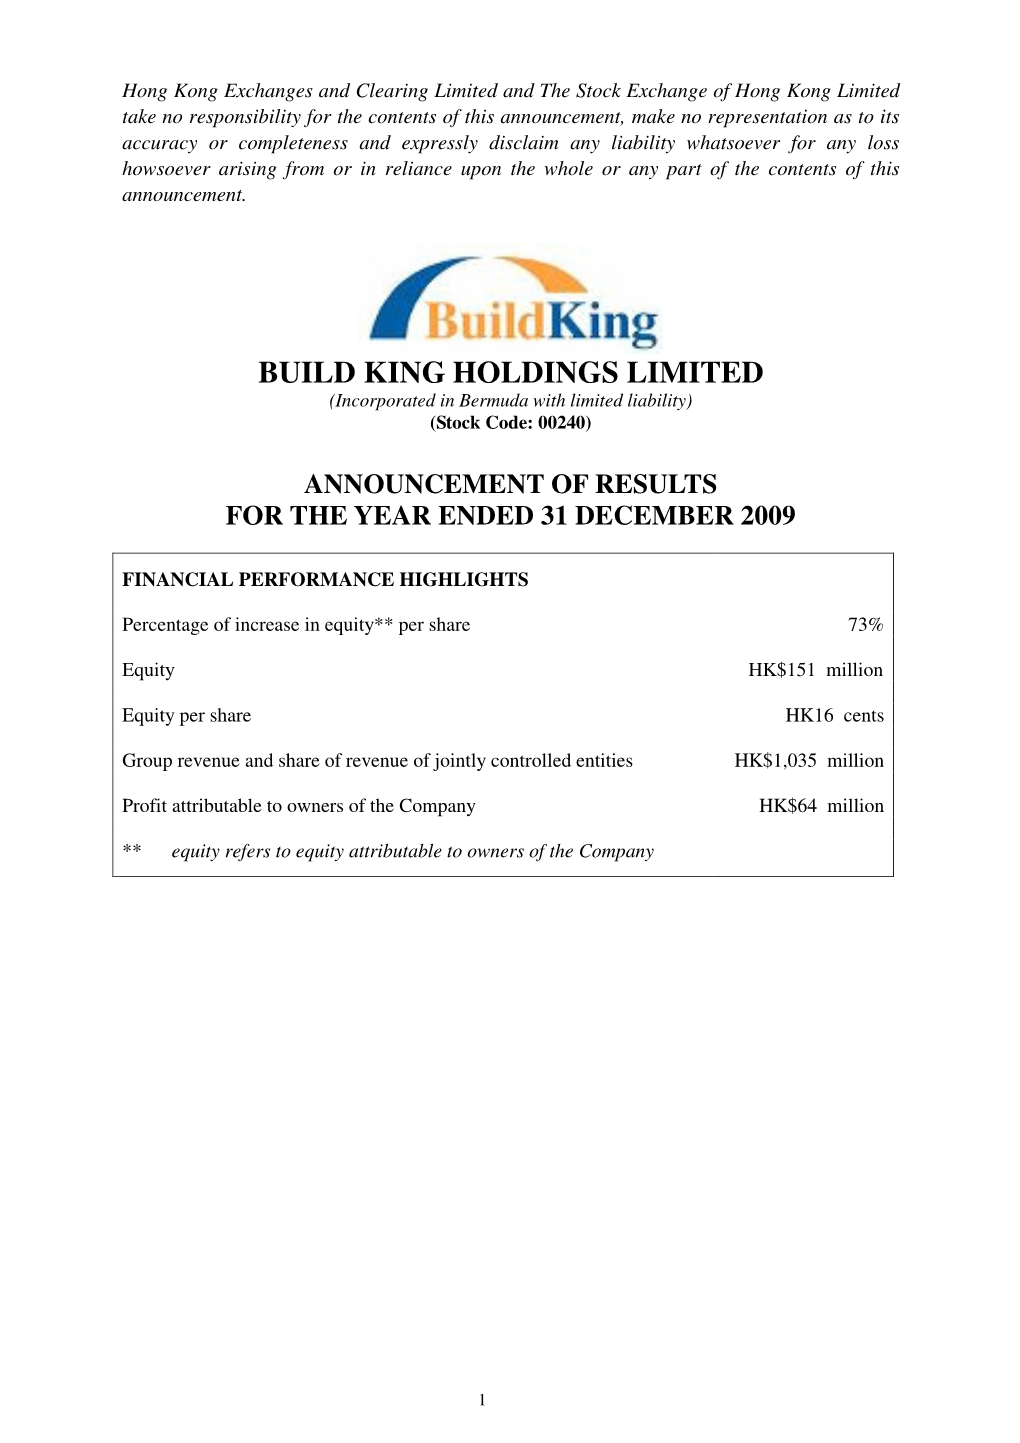 BUILD KING HOLDINGS LIMITED (Incorporated in Bermuda with Limited Liability) (Stock Code: 00240)